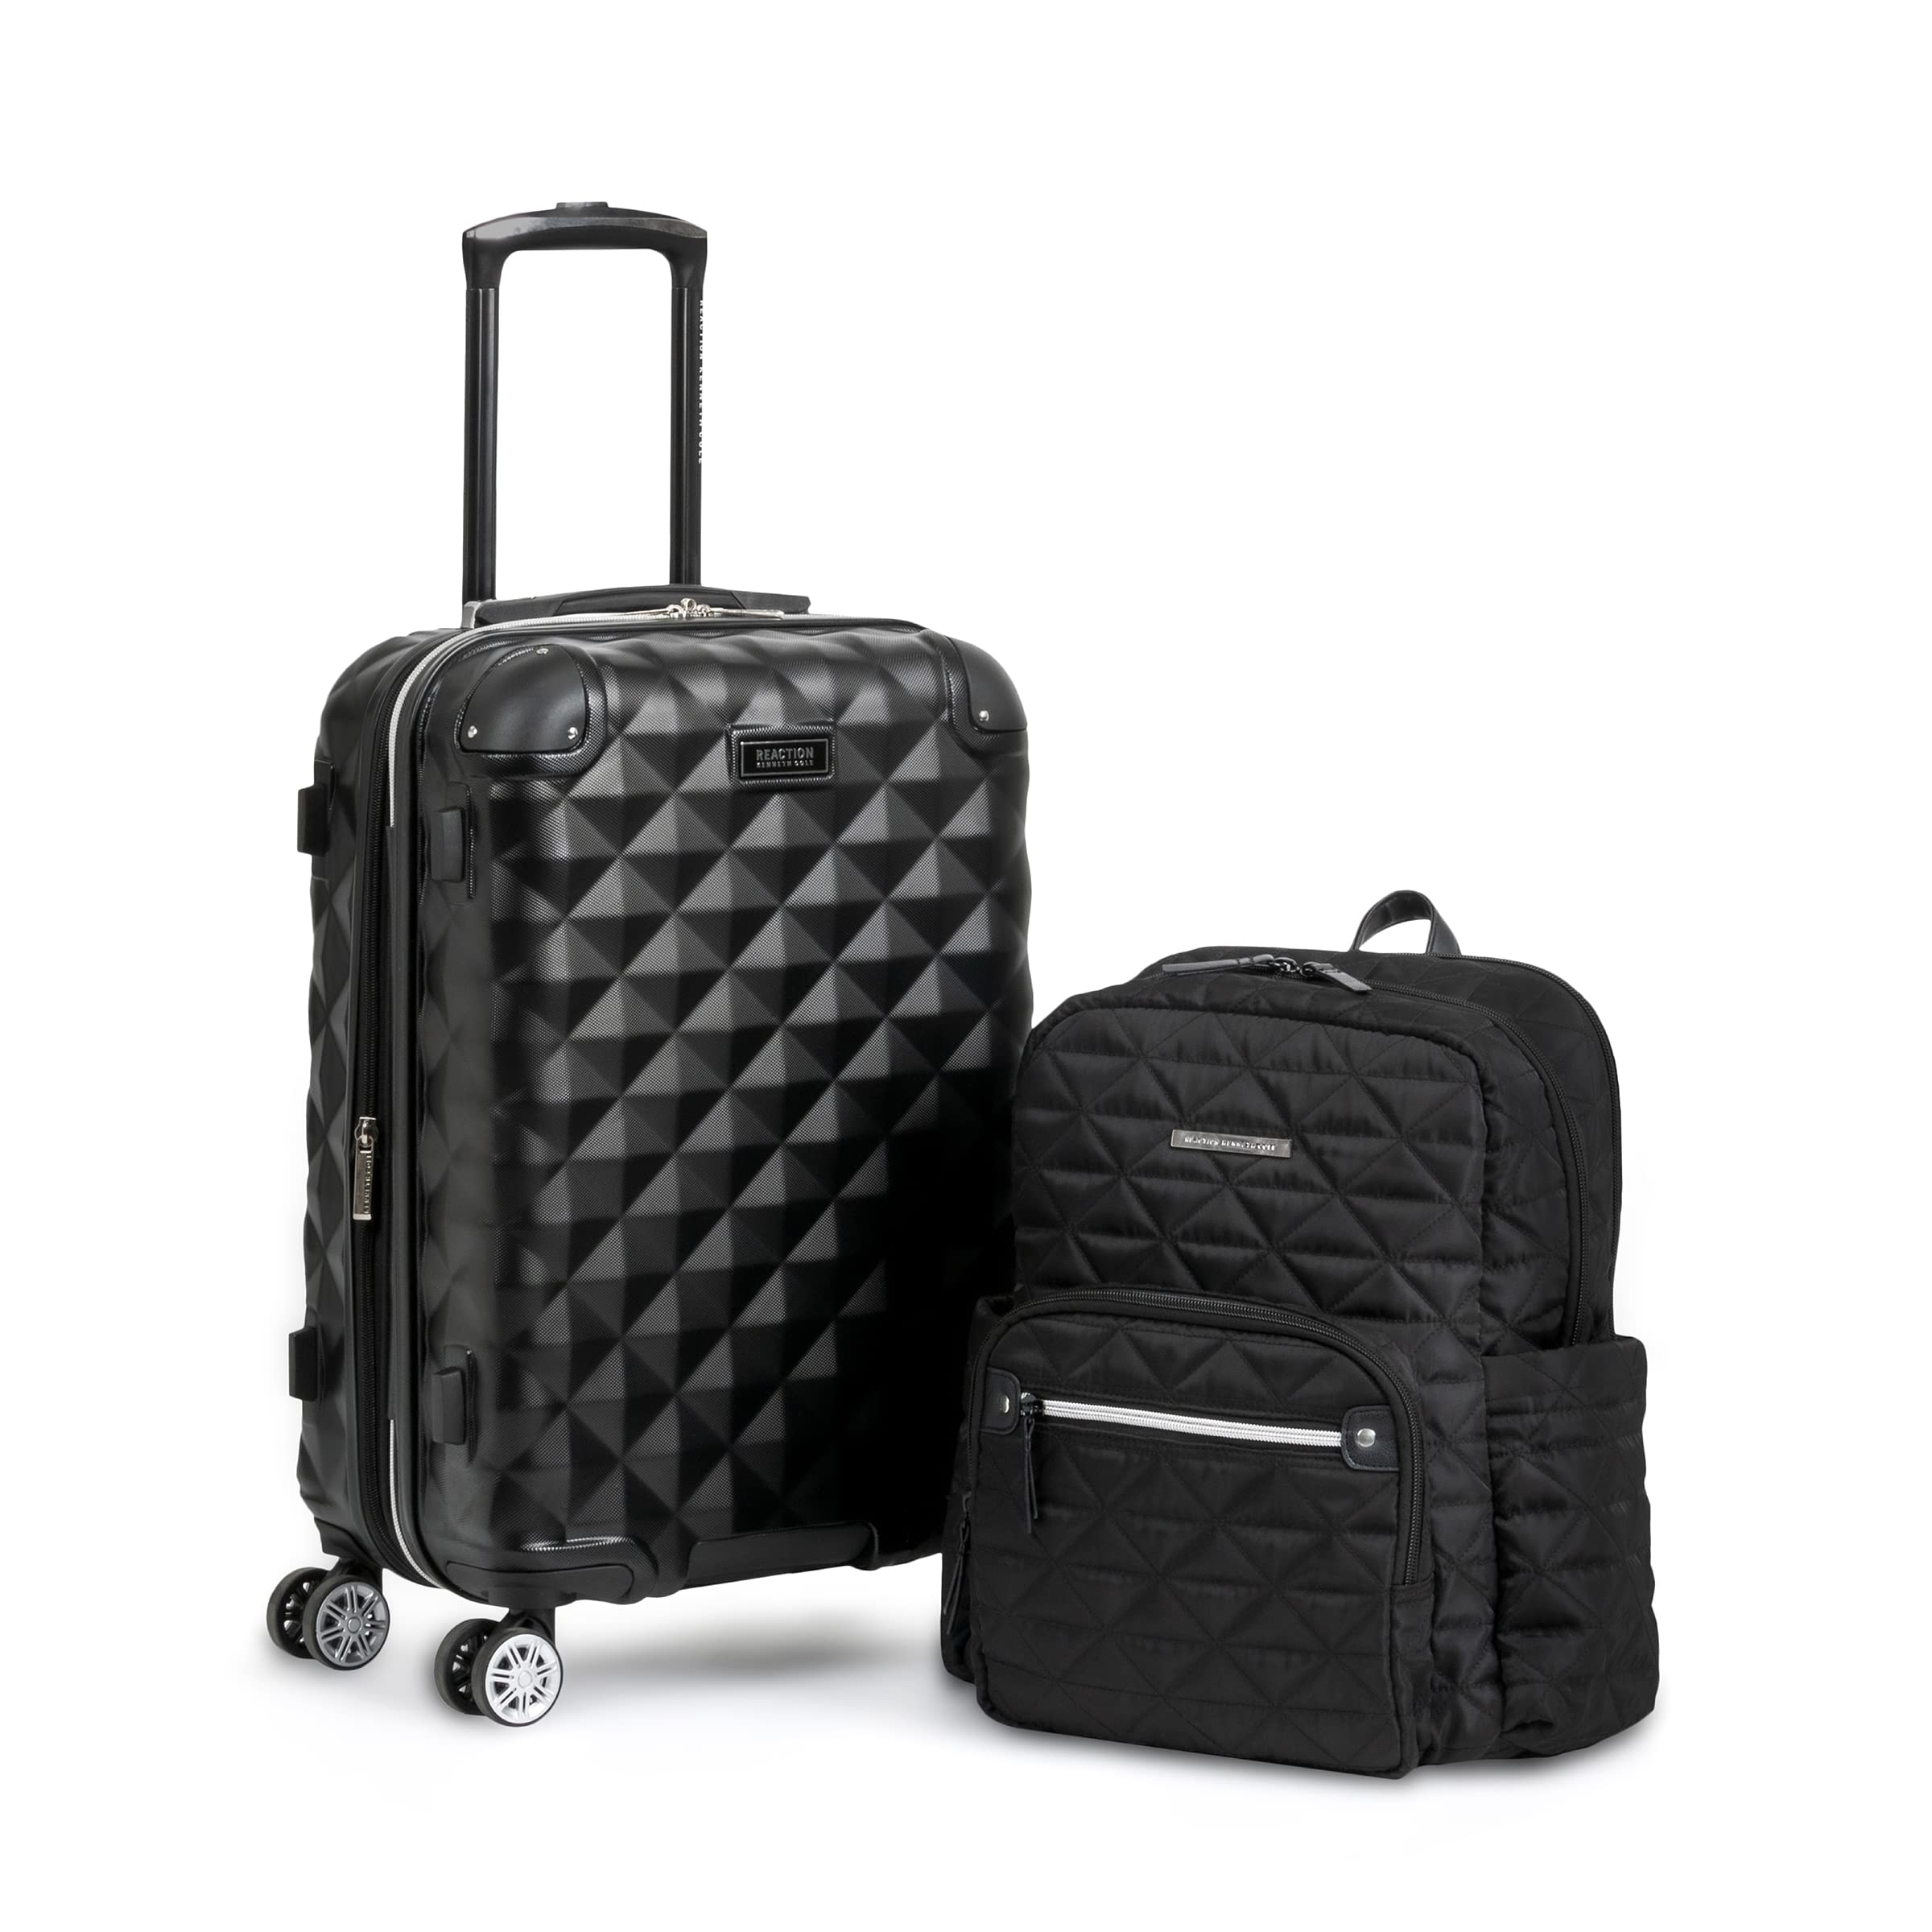 Kenneth Cole Reaction Diamond Tower Collection Lightweight Hardside Expandable 8-Wheel Spinner Travel Luggage, Black, 2pc Bundle (Carry On+Backpack)